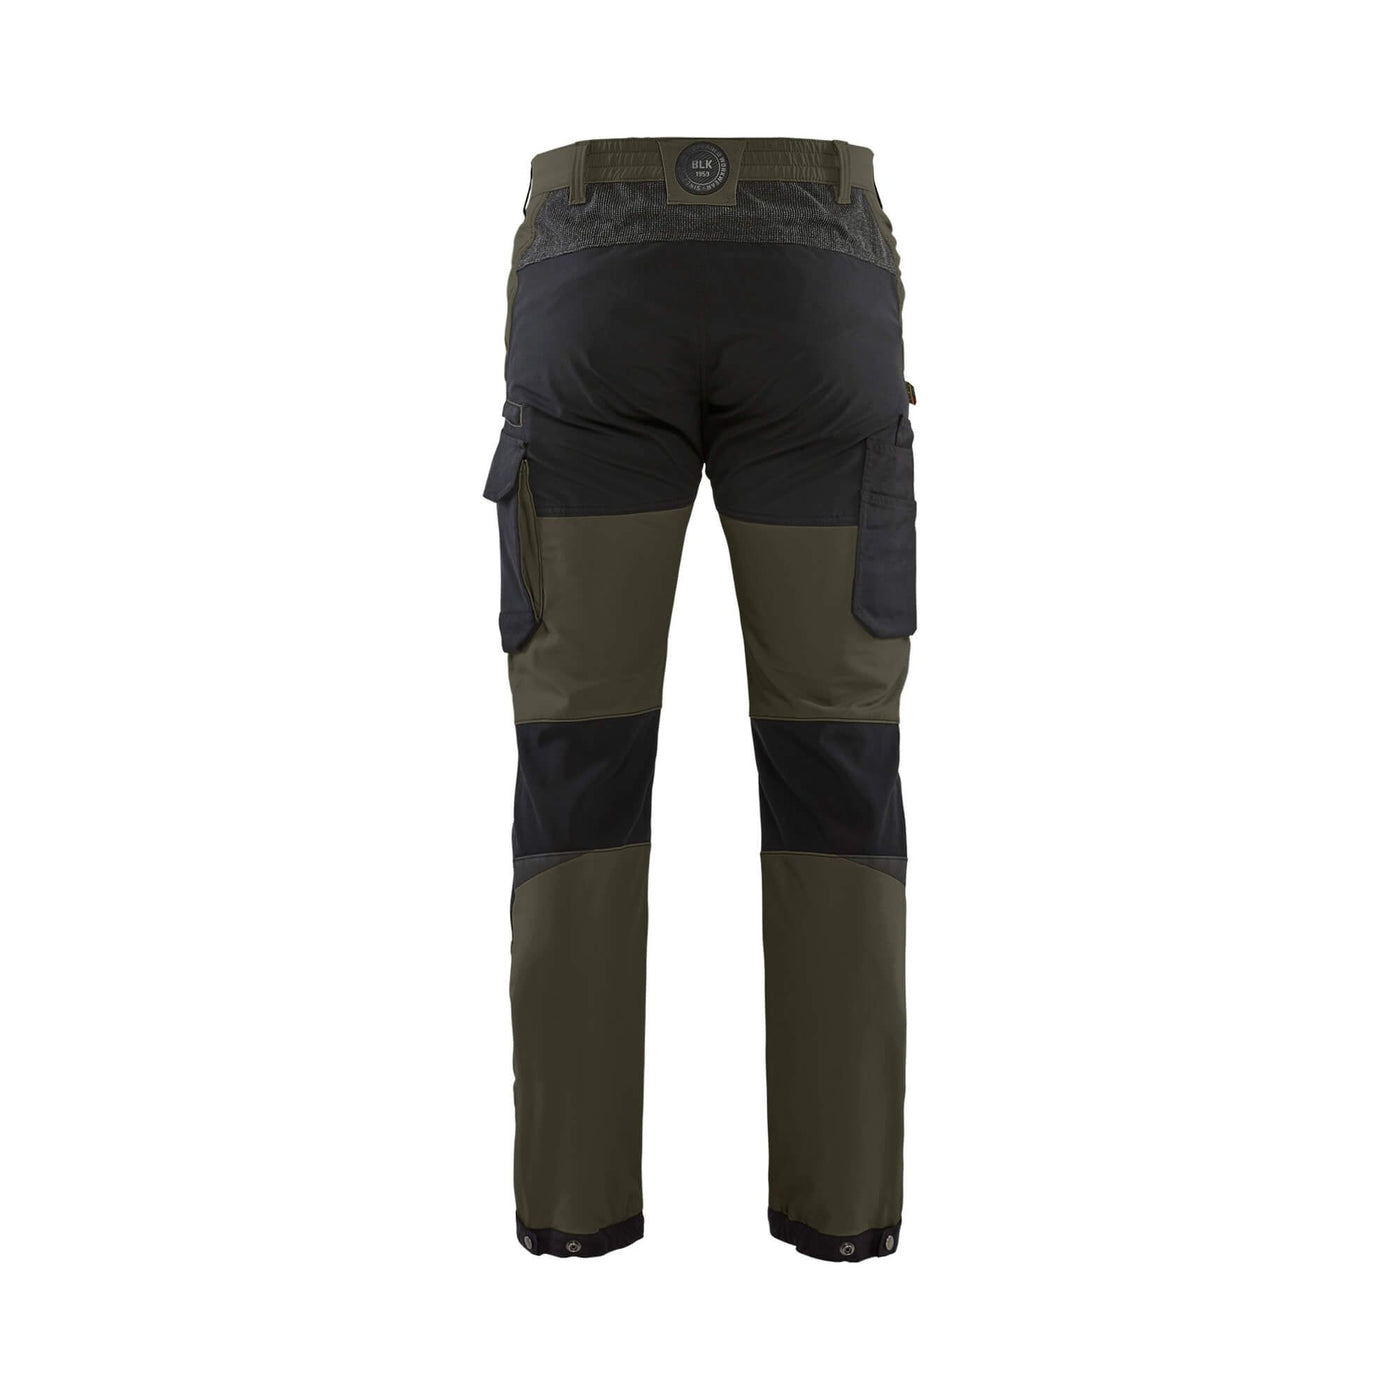 Blaklader 1691 7oz Rip Stop Pants with Stretch and Utility Pockets - Stone  | Trusted Gear Company LLC